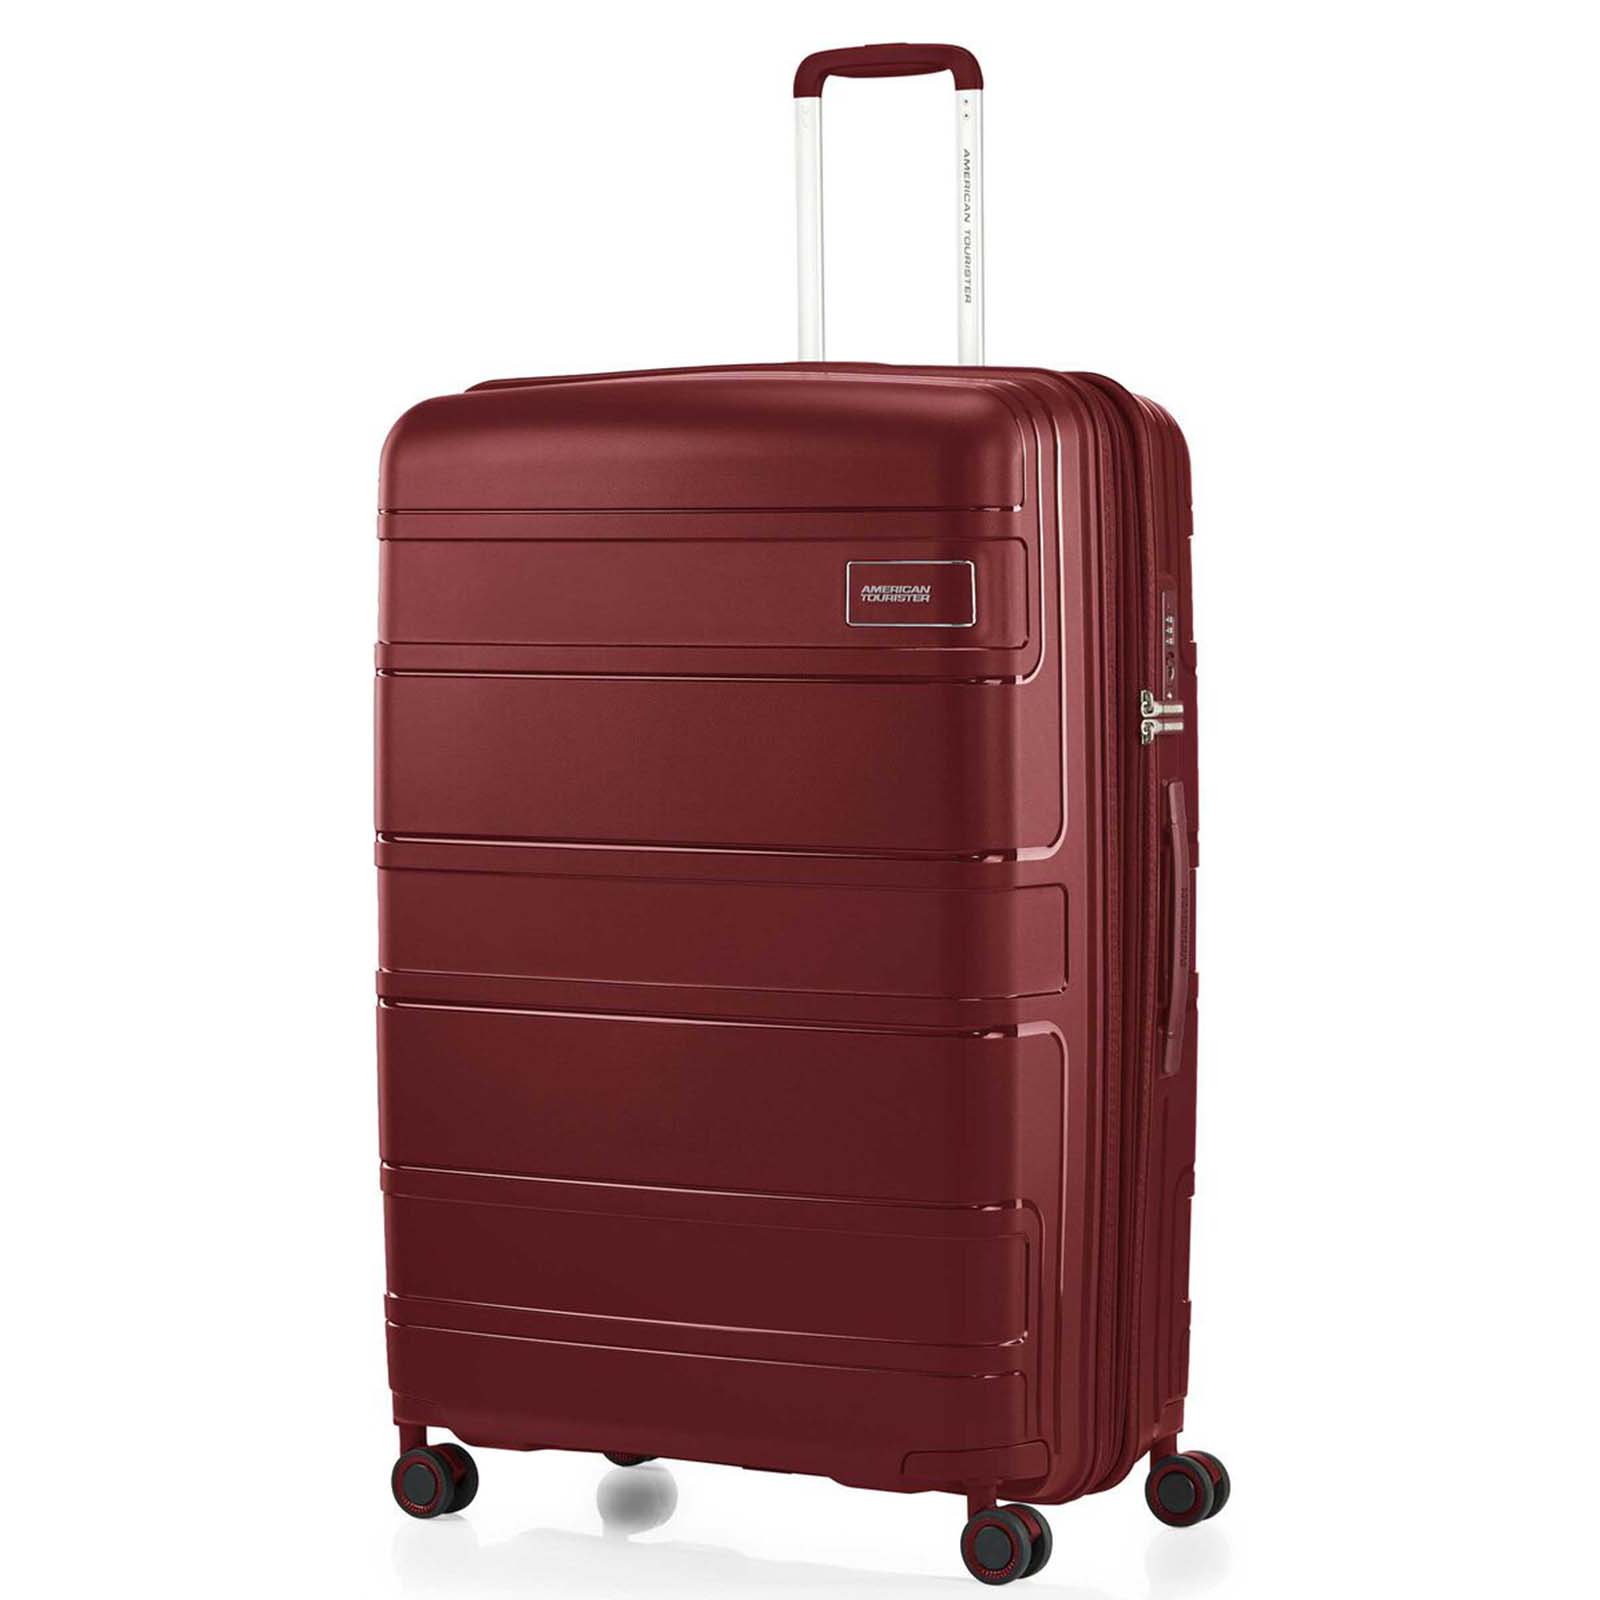 American-Tourister-Light-Max-82cm-Suitcase-Dahlia-Front-Angle